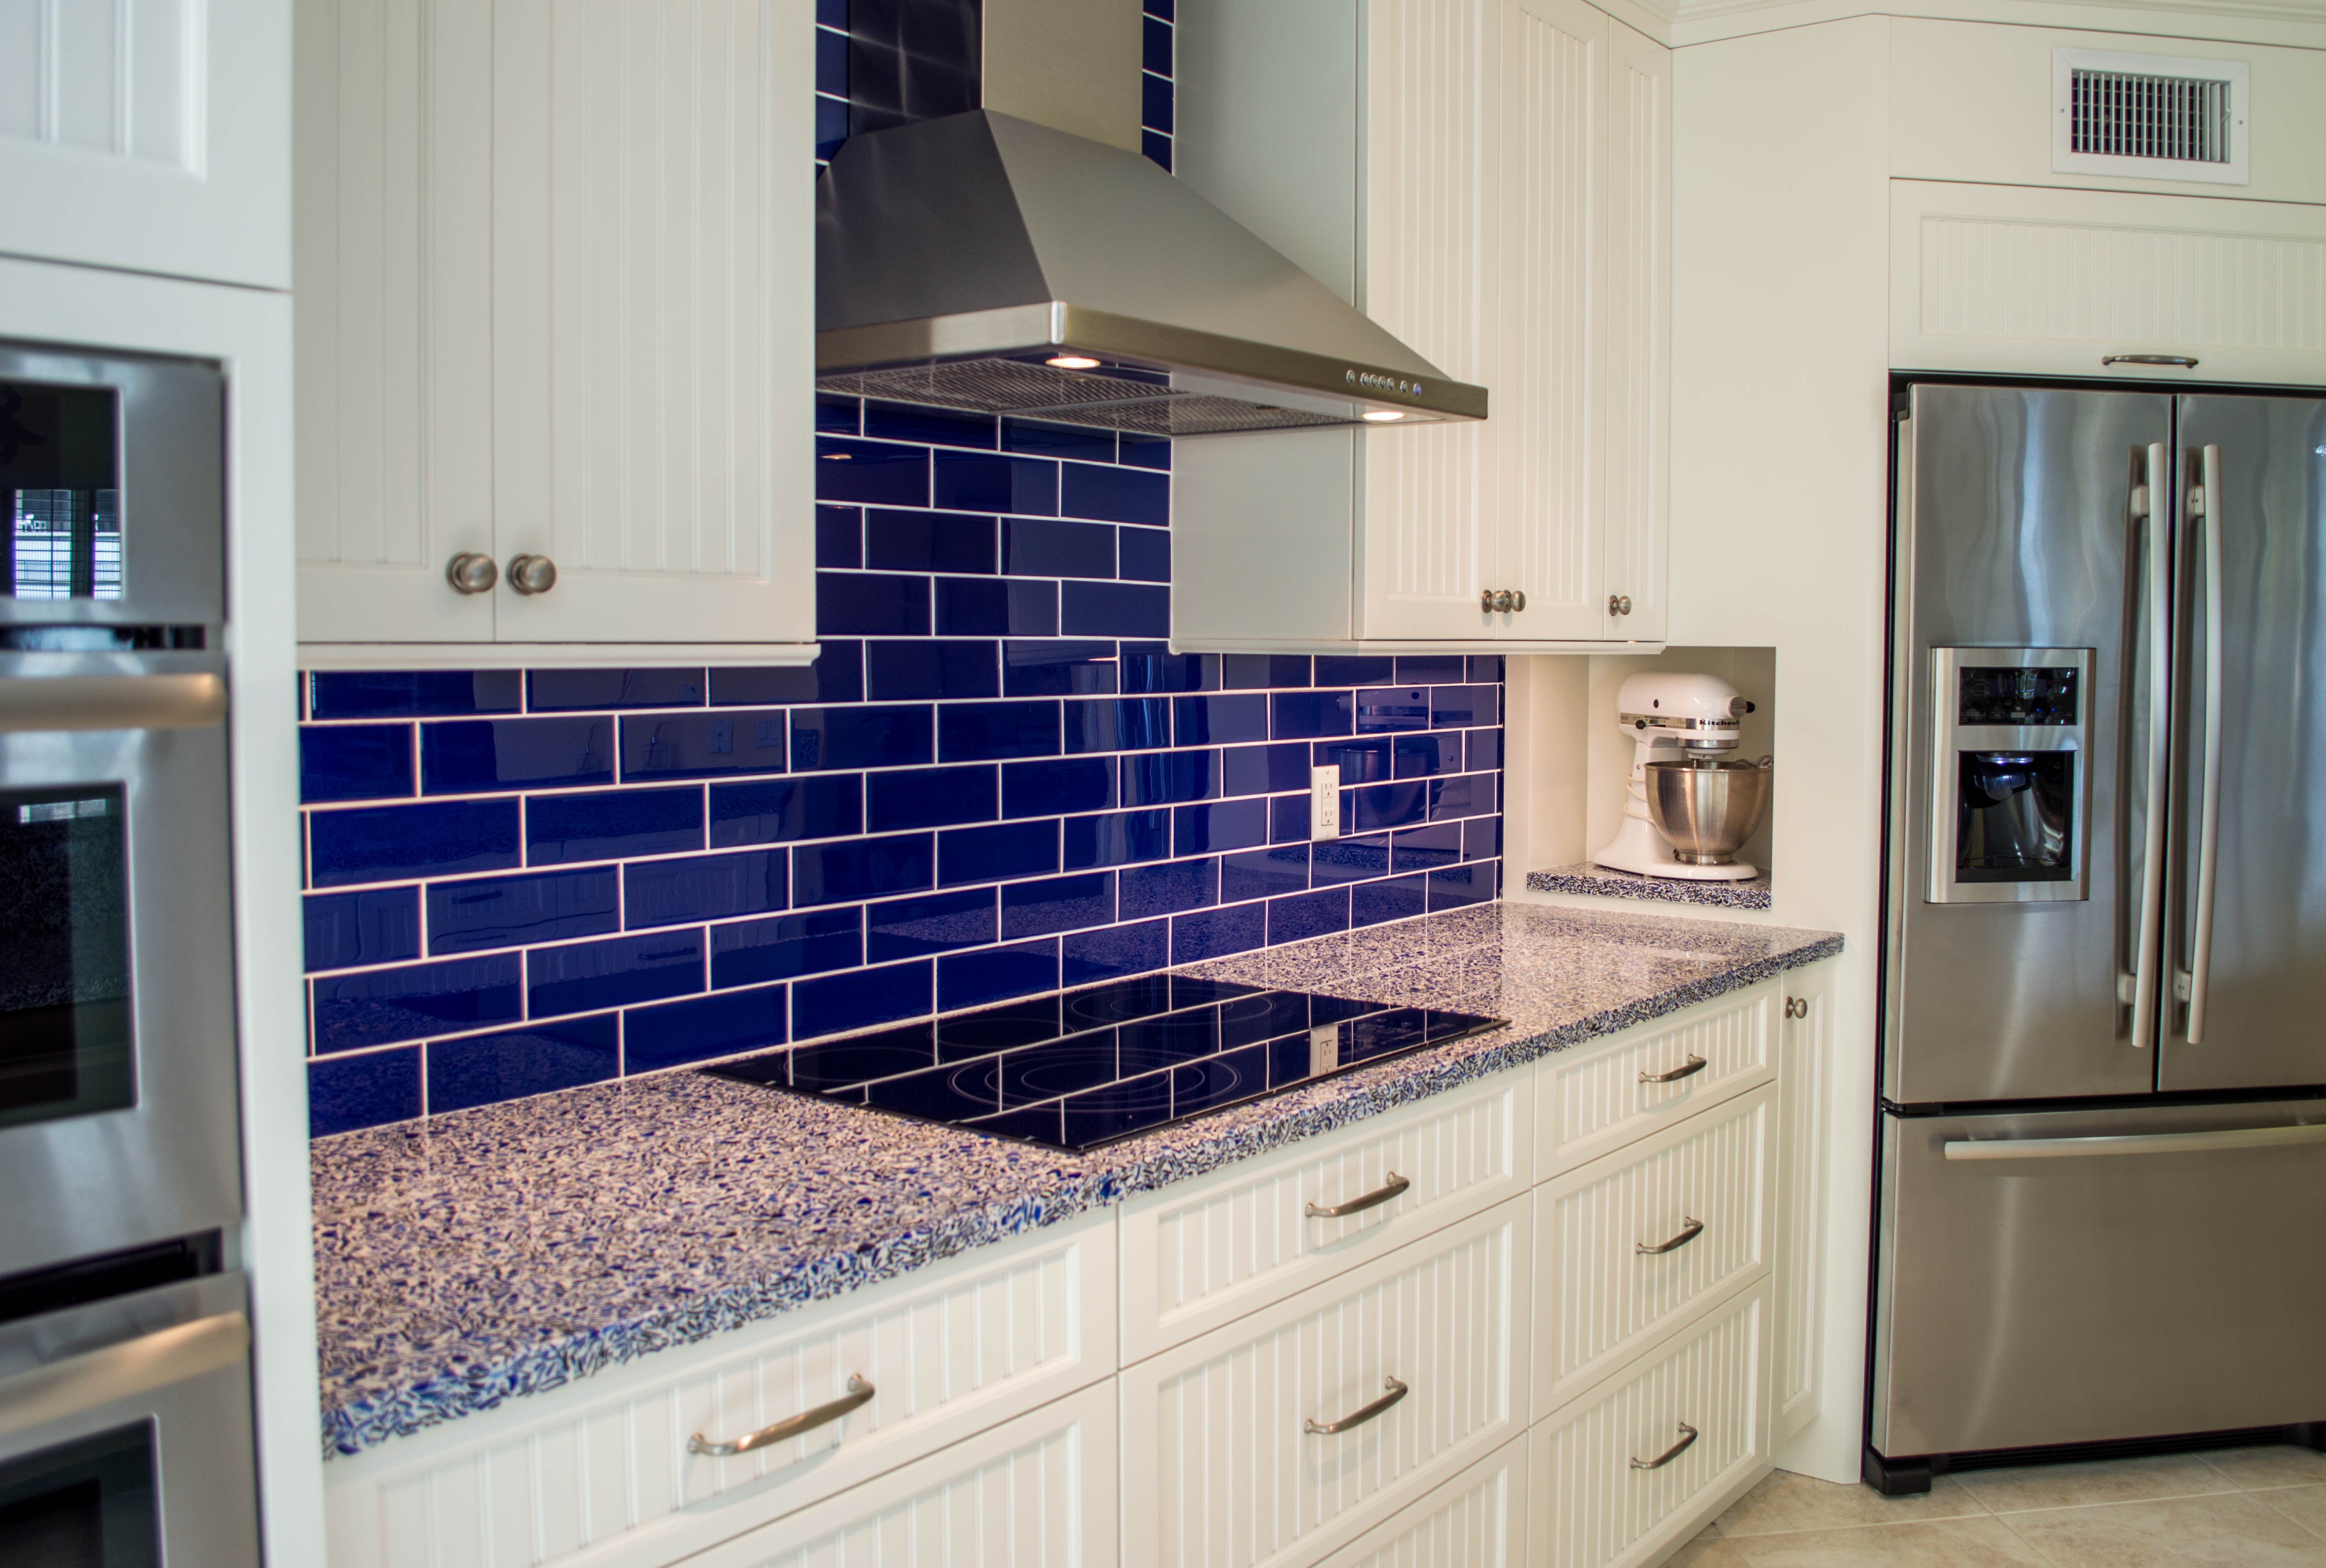 3-vetrazzo recycled glass in cobalt skye for countertops and creative kitchen storage by waterview kitchens